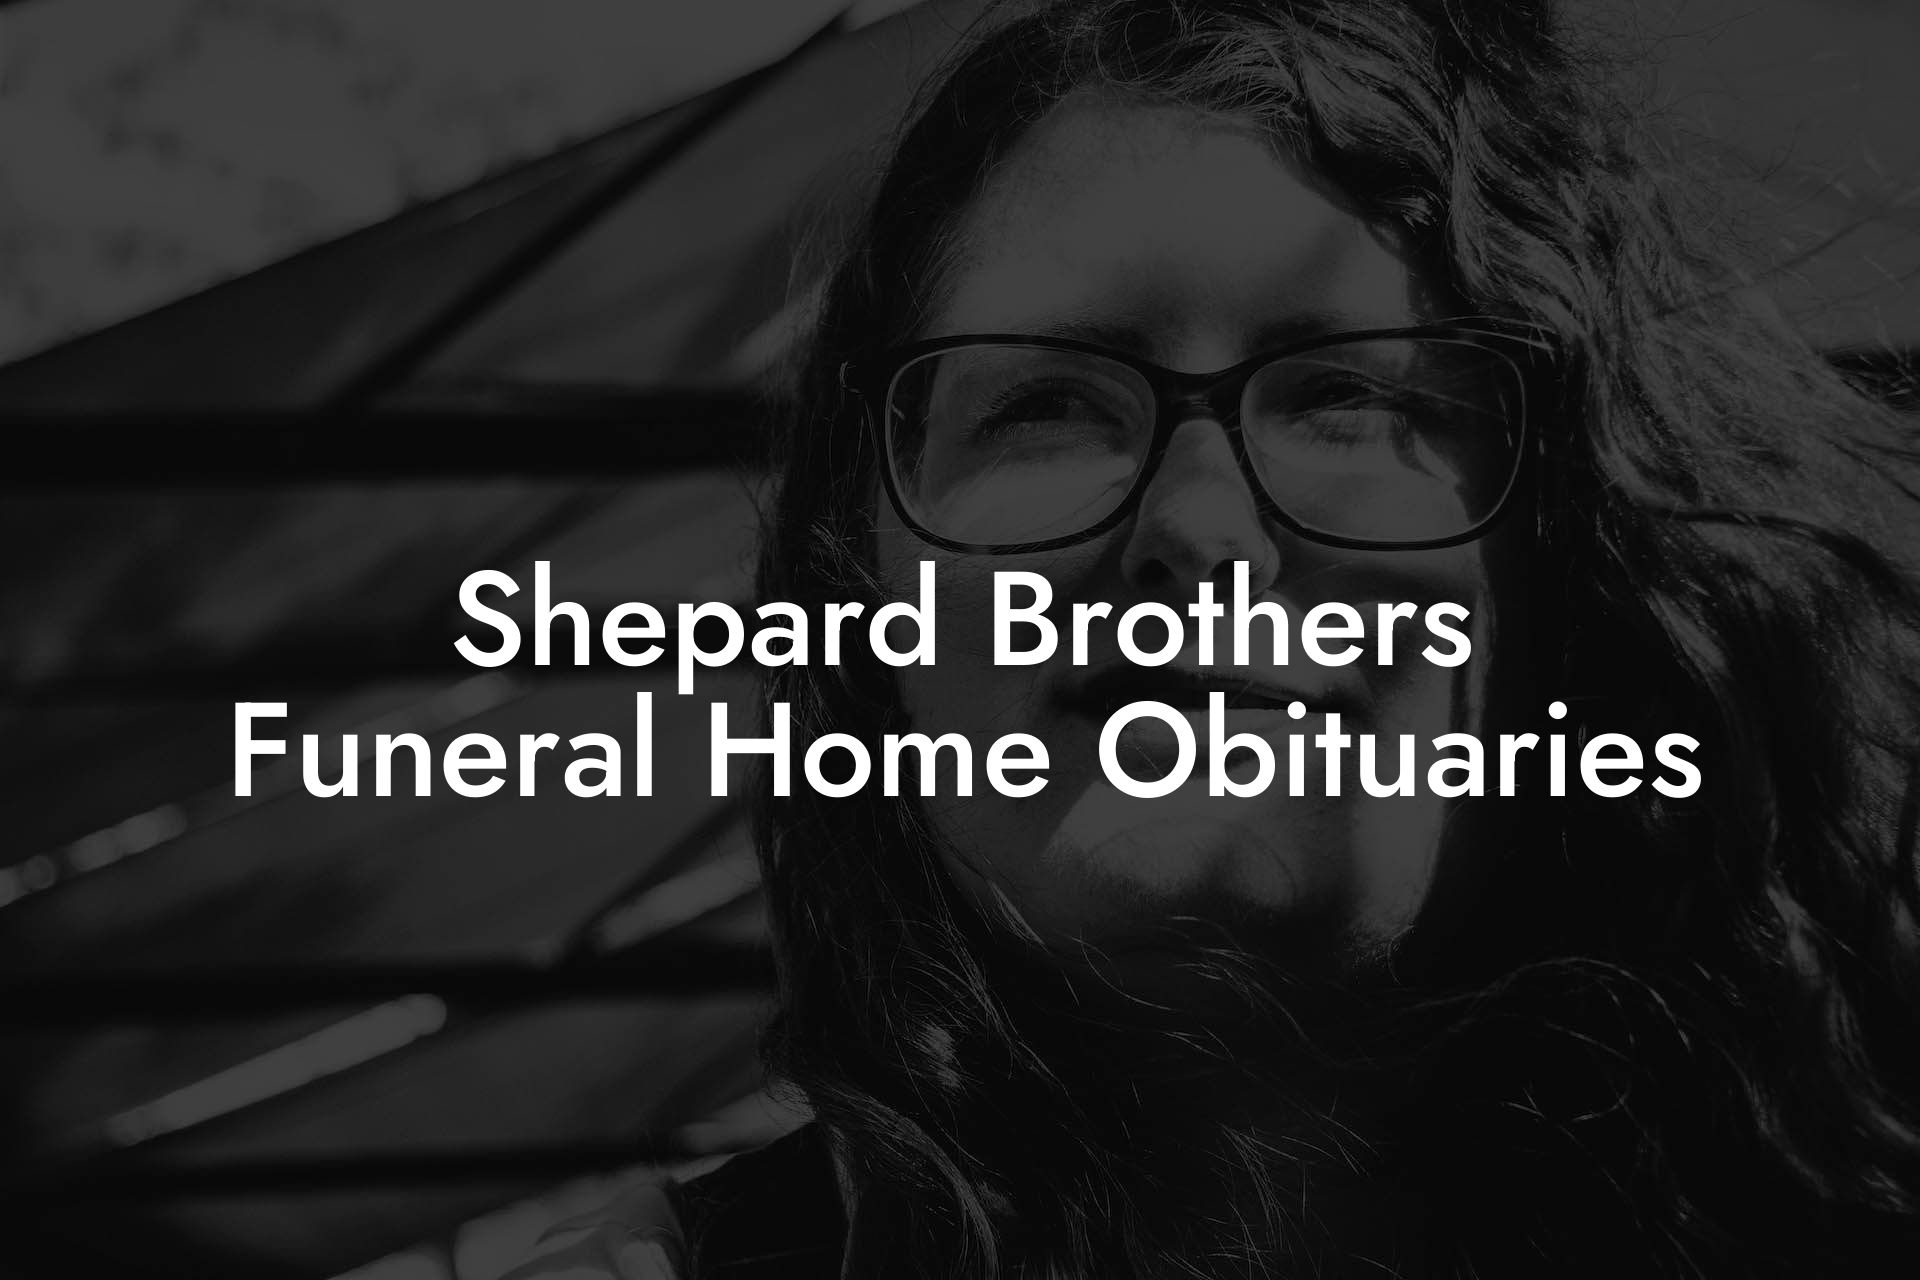 Shepard Brothers Funeral Home Obituaries